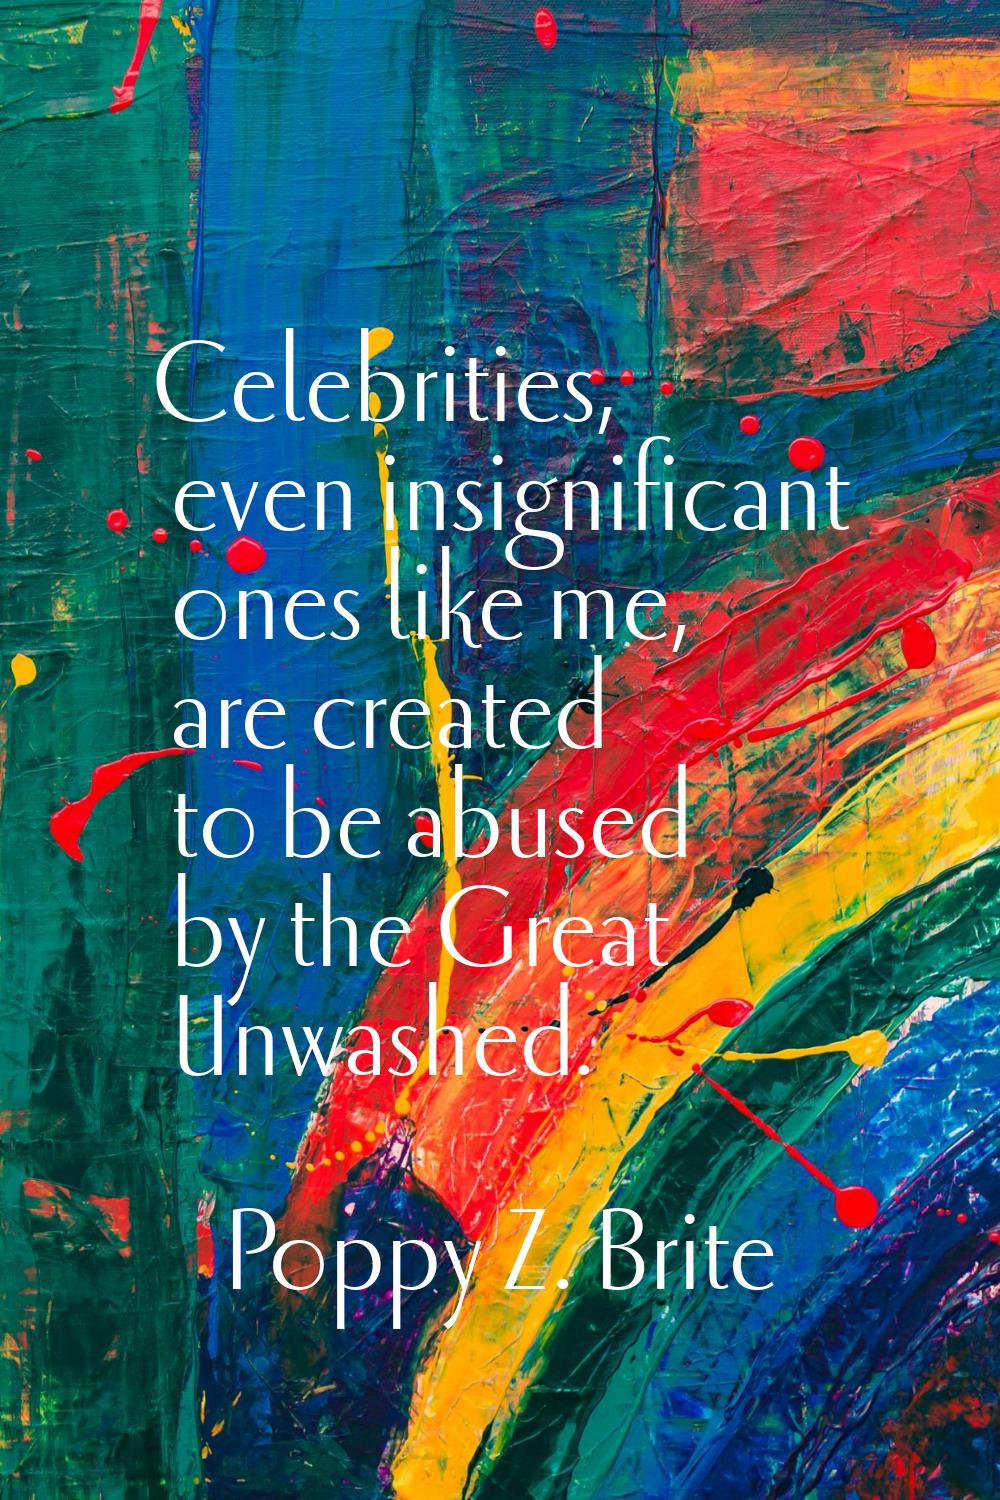 Celebrities, even insignificant ones like me, are created to be abused by the Great Unwashed.